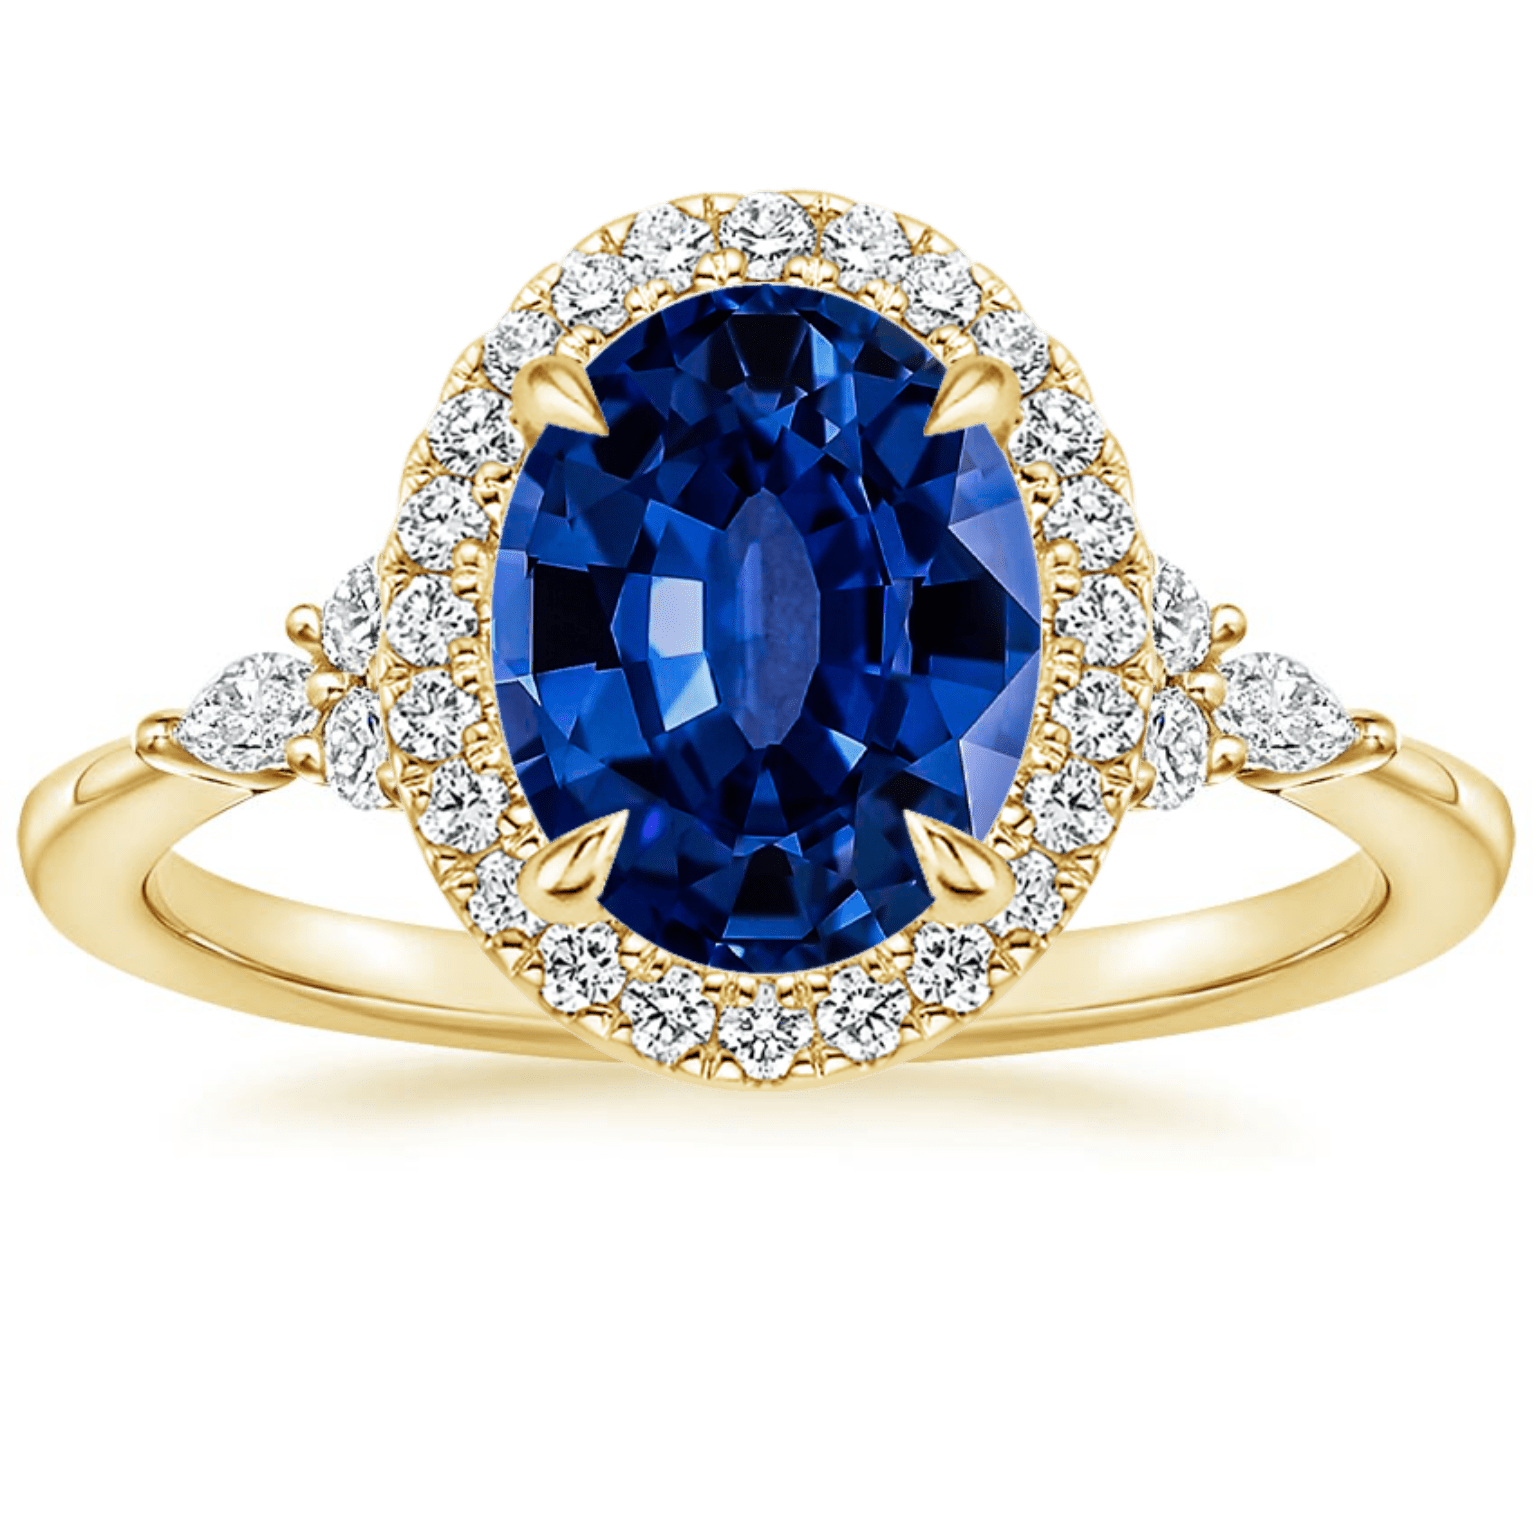 Lab Created Sapphires: Here’s Why They’re an Excellent Choice